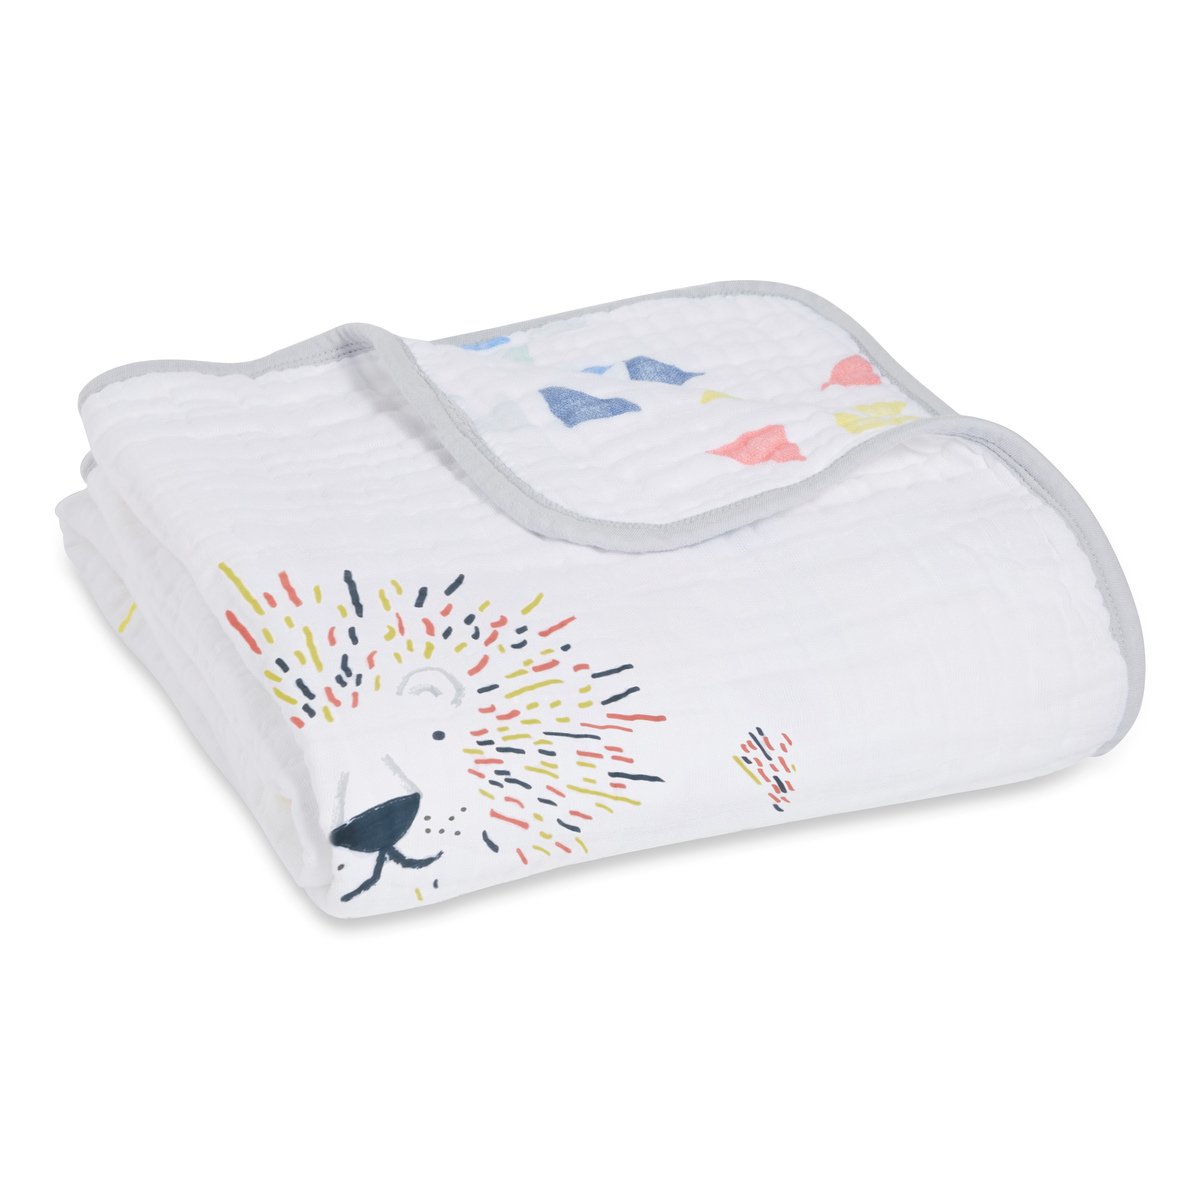 aden + anais Dream blanket, 4 layers 100% cotton muslin, 120 cm x 120 cm, leader of the pack.